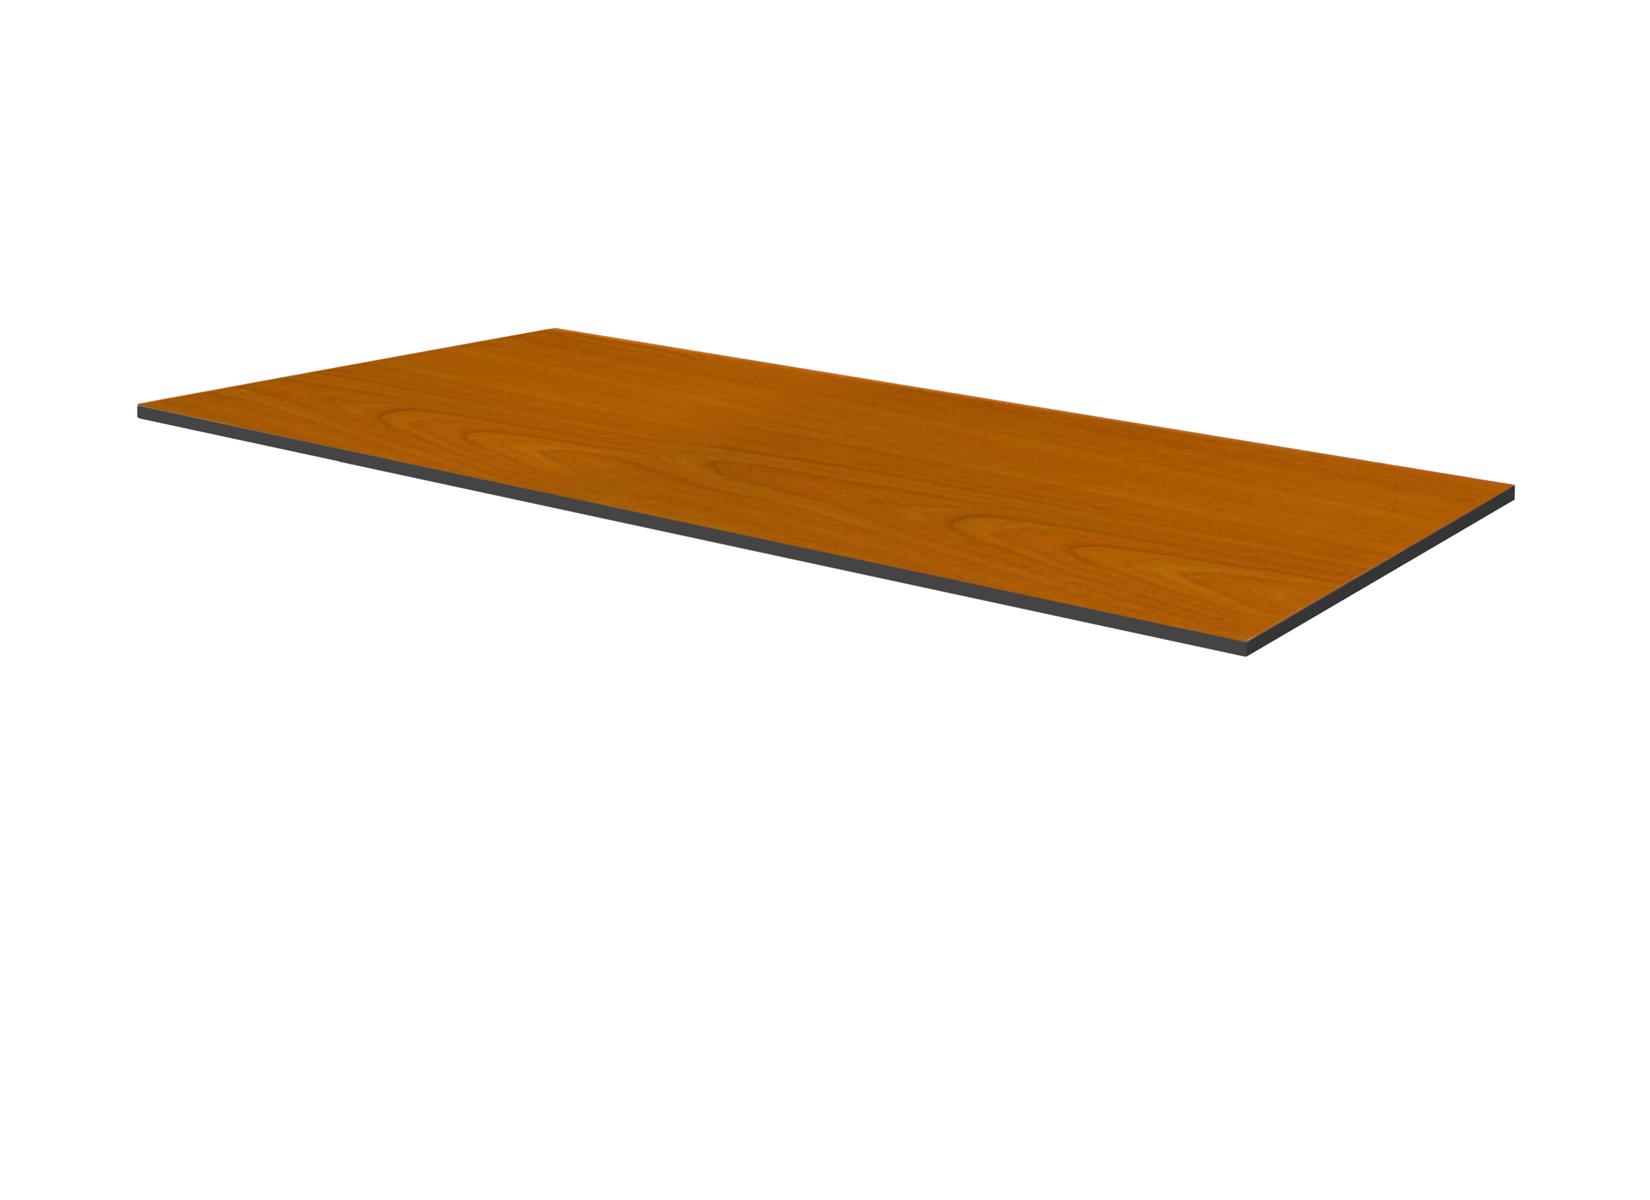 Rectangular Conference Tables / Mee (end 2/26/2020 12:15 PM)1650 x 1200